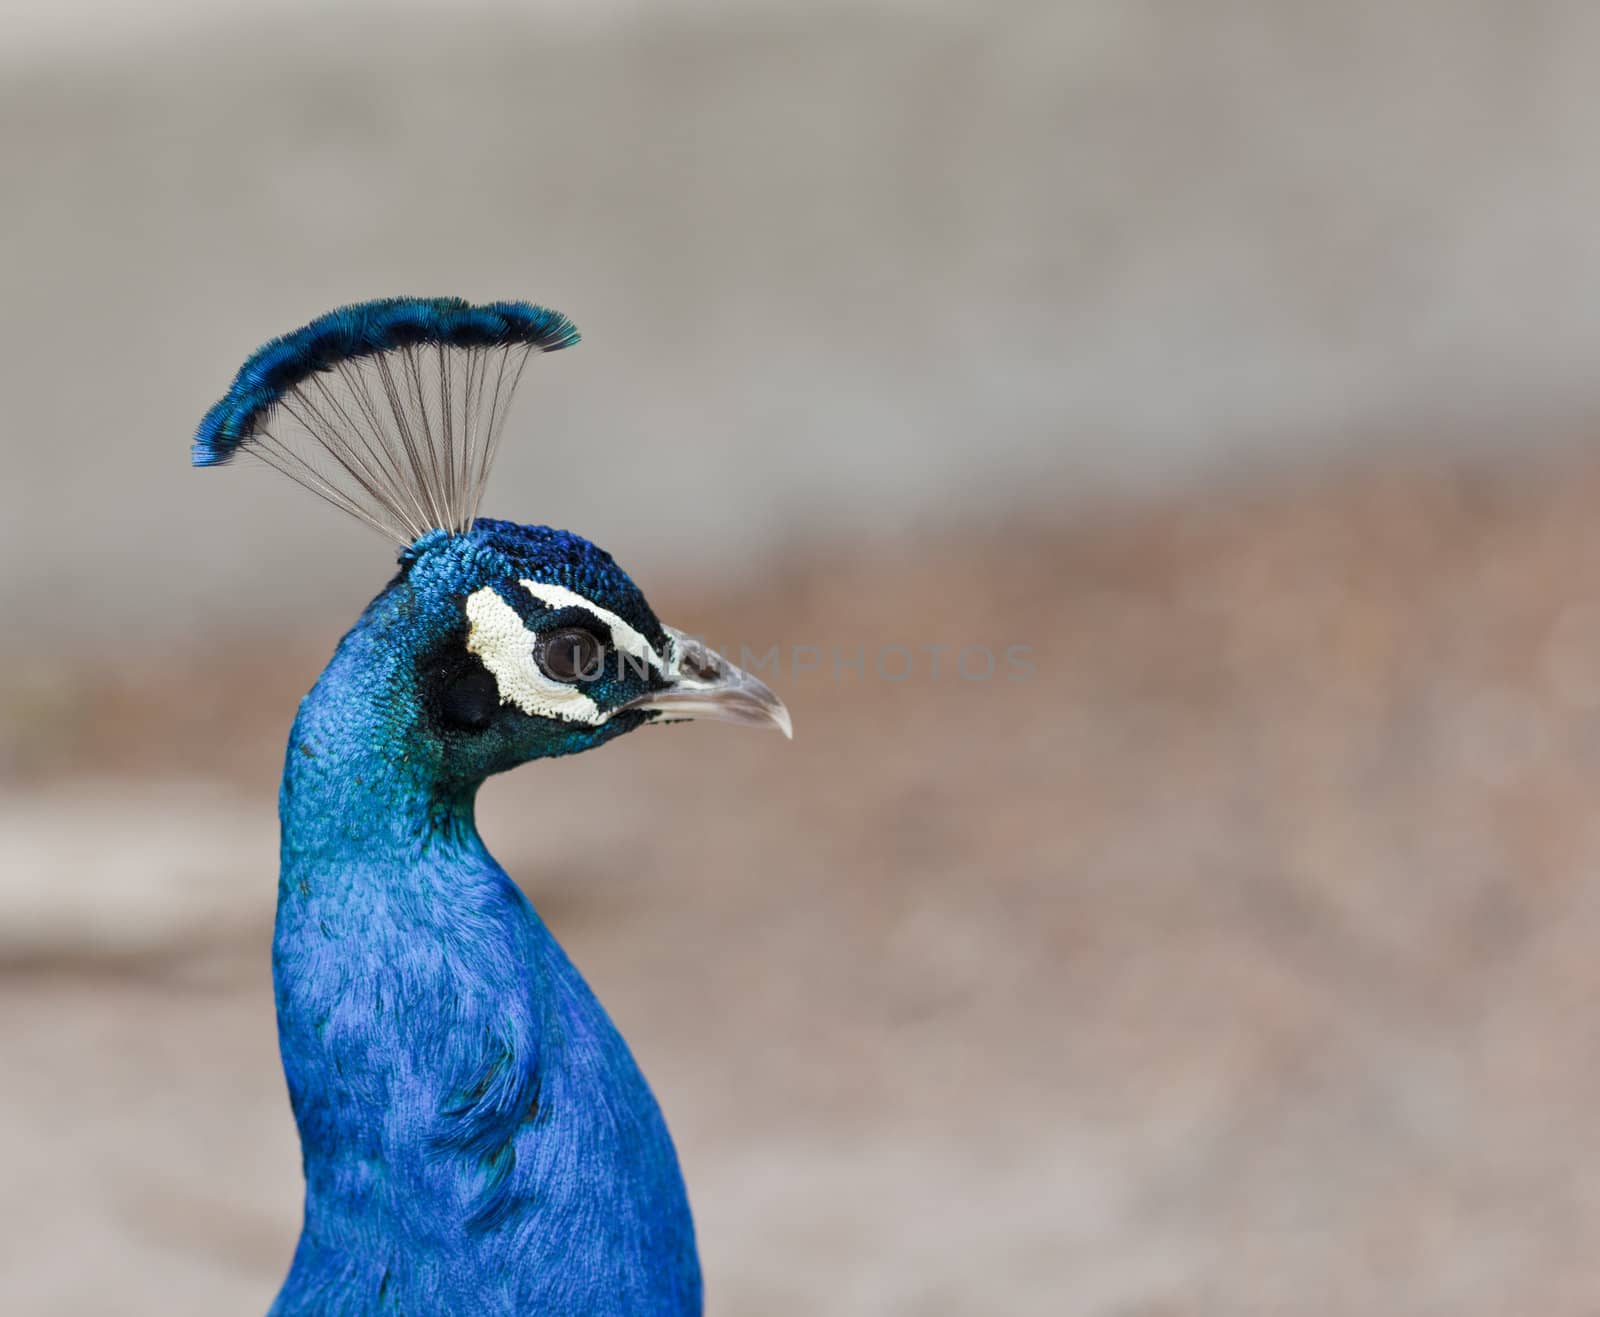 A close up shot of a peacock (Pavo cristatus) with room for copy space